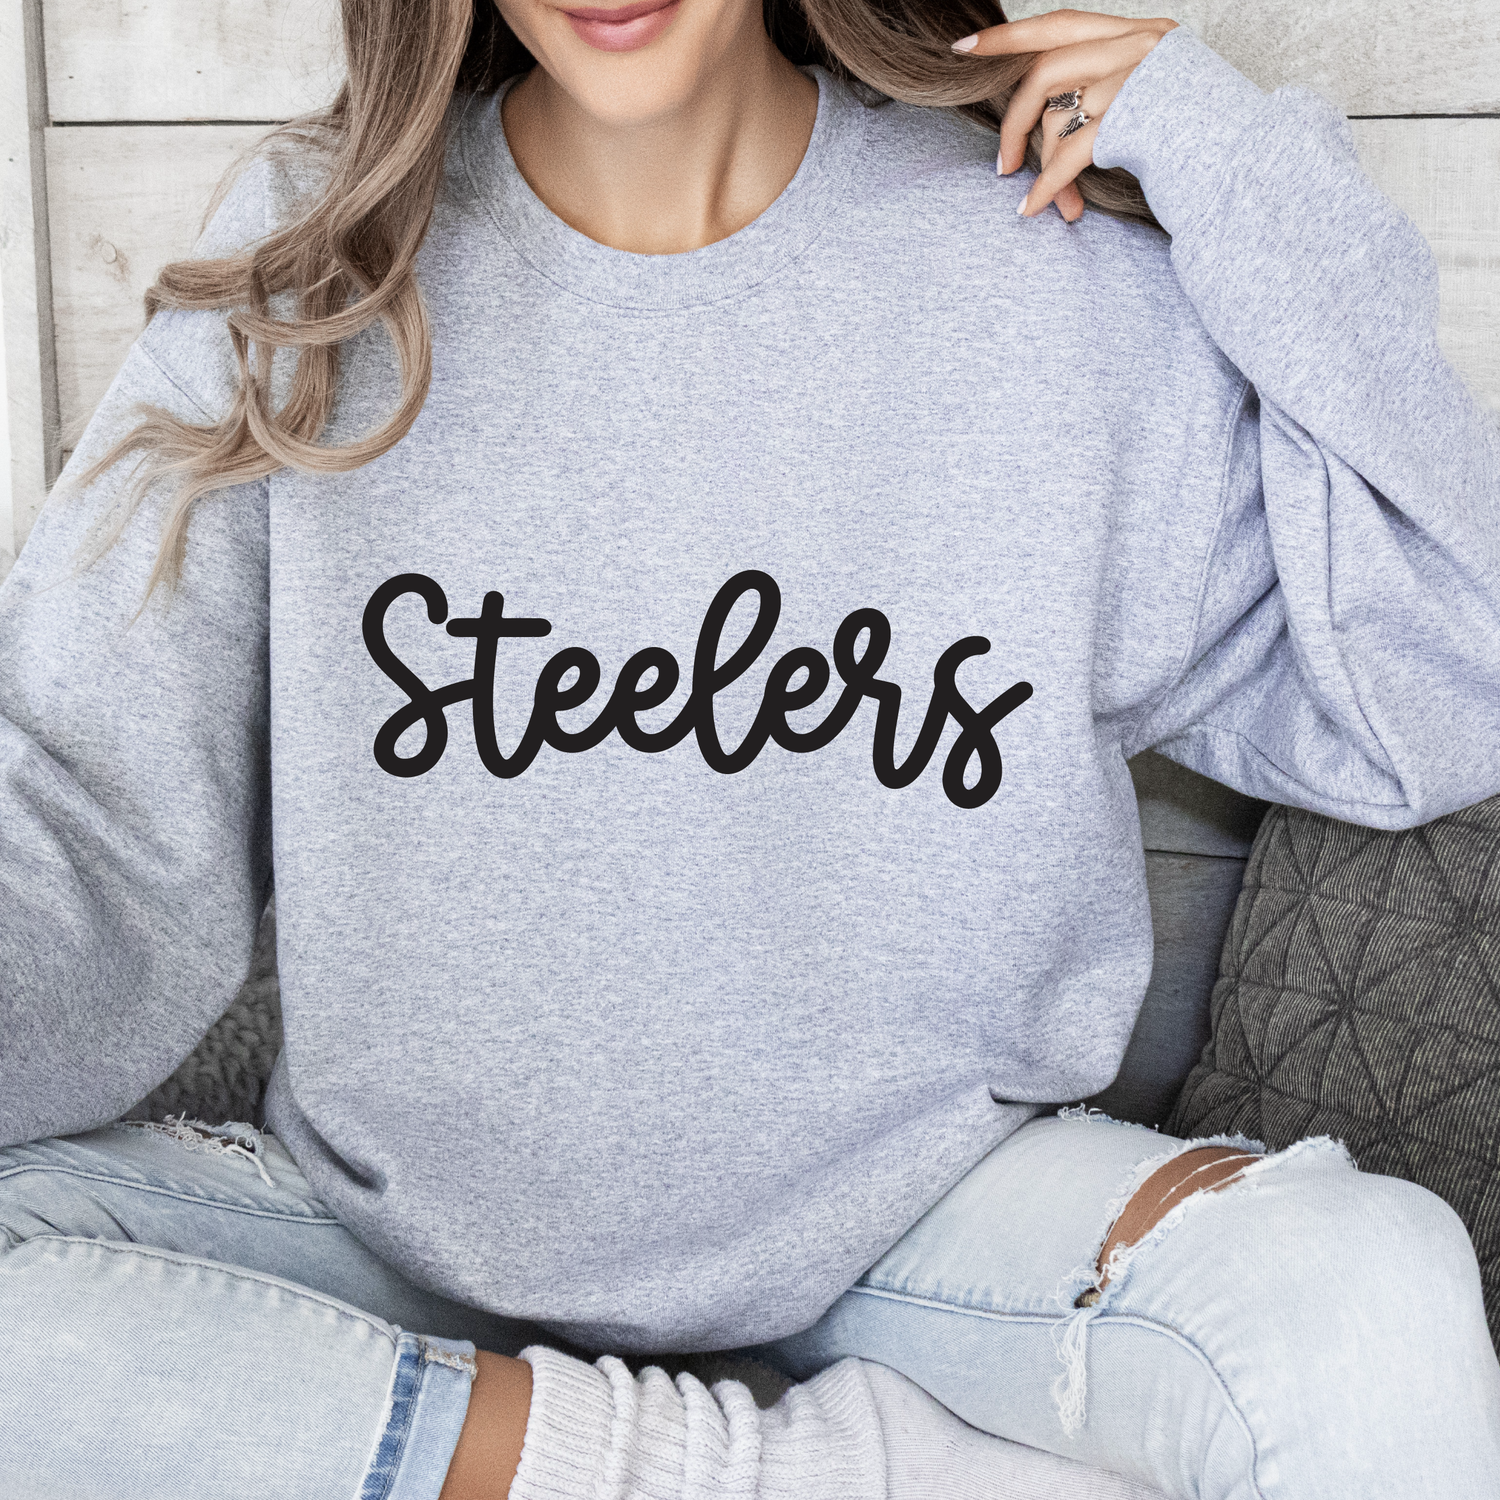 a woman sitting on a couch wearing a sweatshirt with the word steeles on it